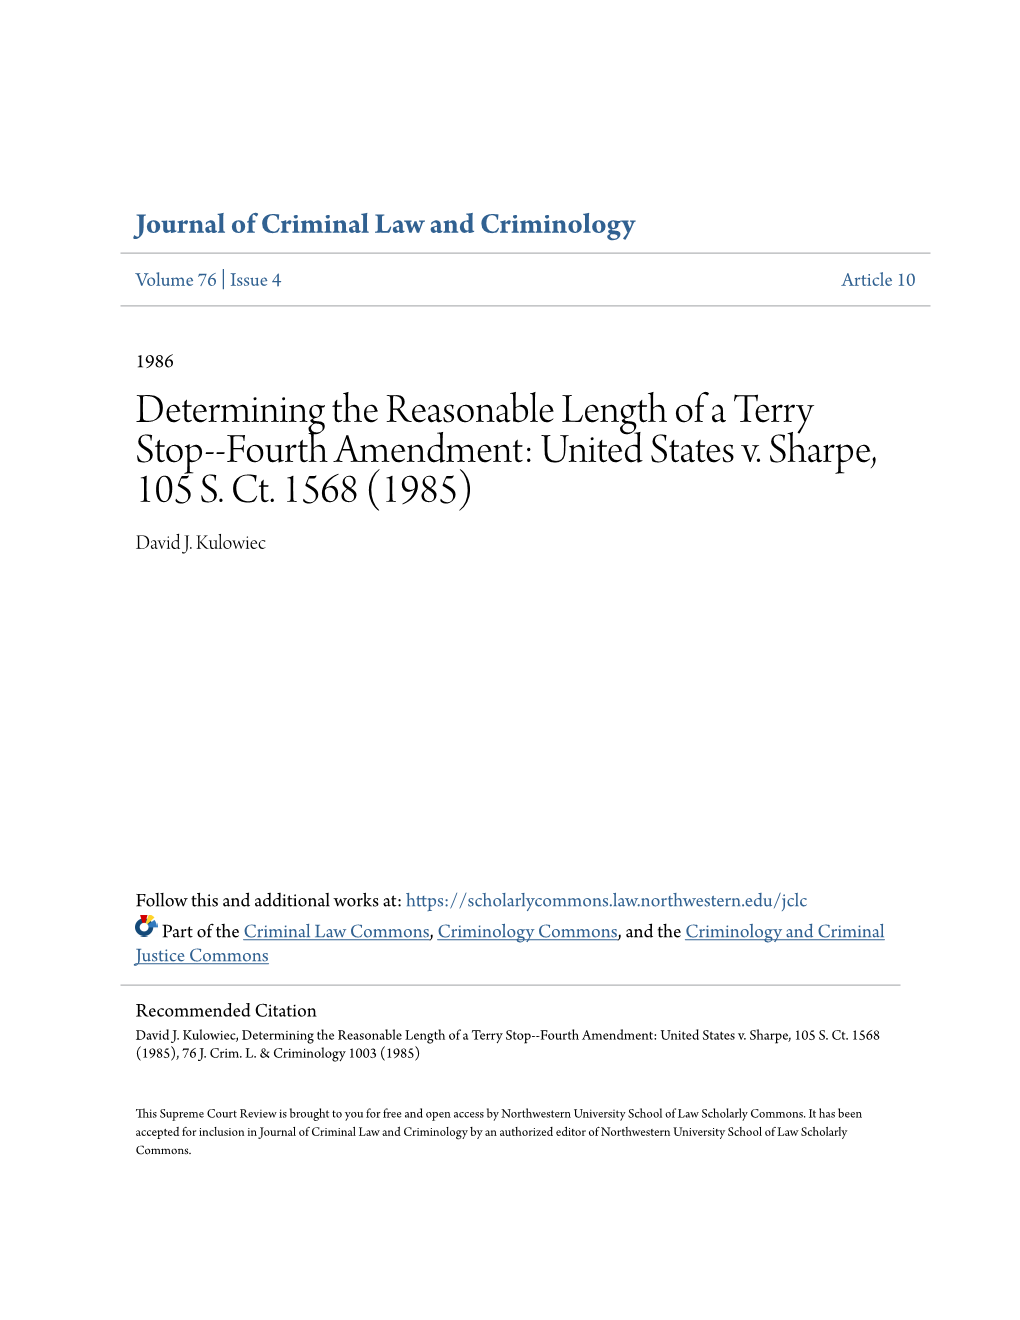 Determining the Reasonable Length of a Terry Stop--Fourth Amendment: United States V